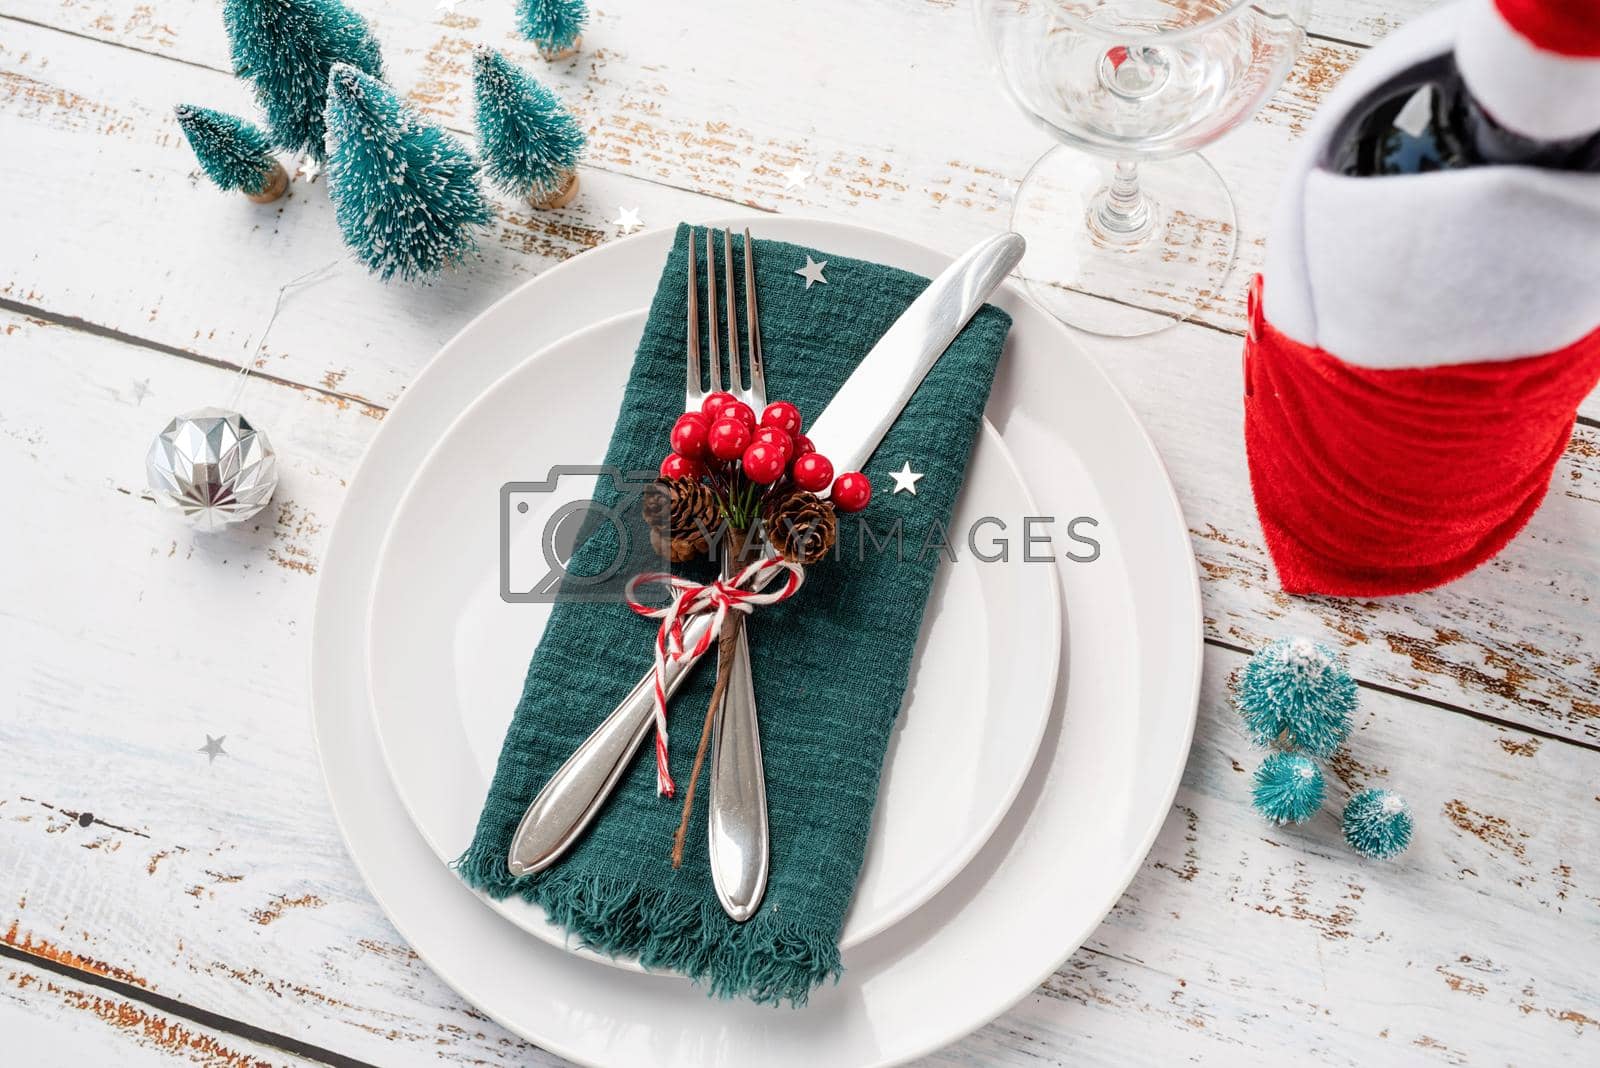 Royalty free image of Christmas table setting with white dishware, silverware and red and green decorations on white wooden background. High angle view. by Desperada